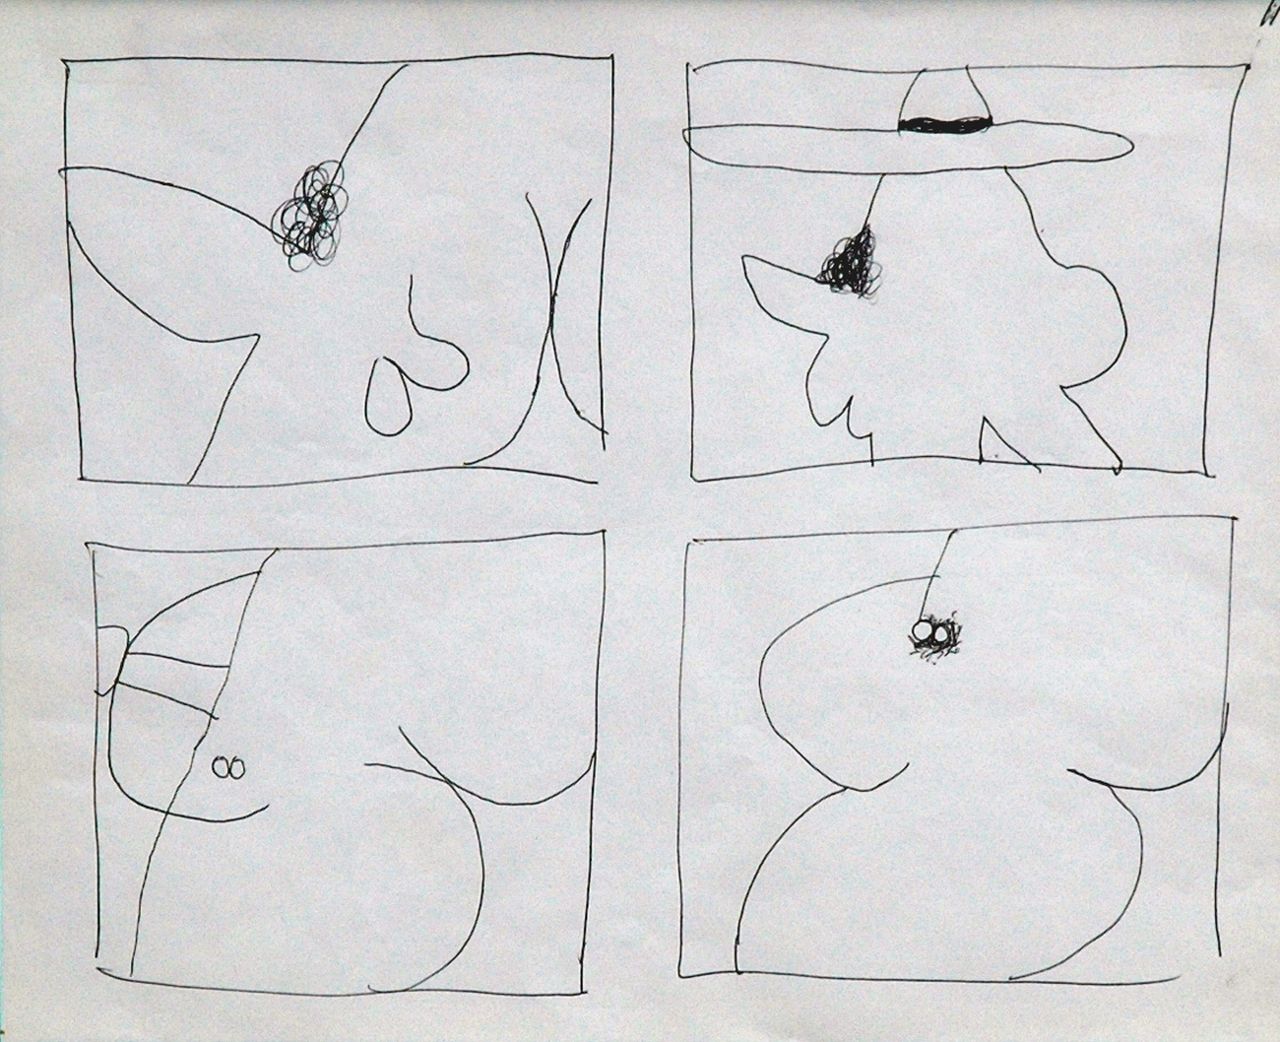 Roëde J.  | Jan Roëde | Watercolours and drawings offered for sale | Erotic sketches, pen on paper 20.7 x 25.9 cm